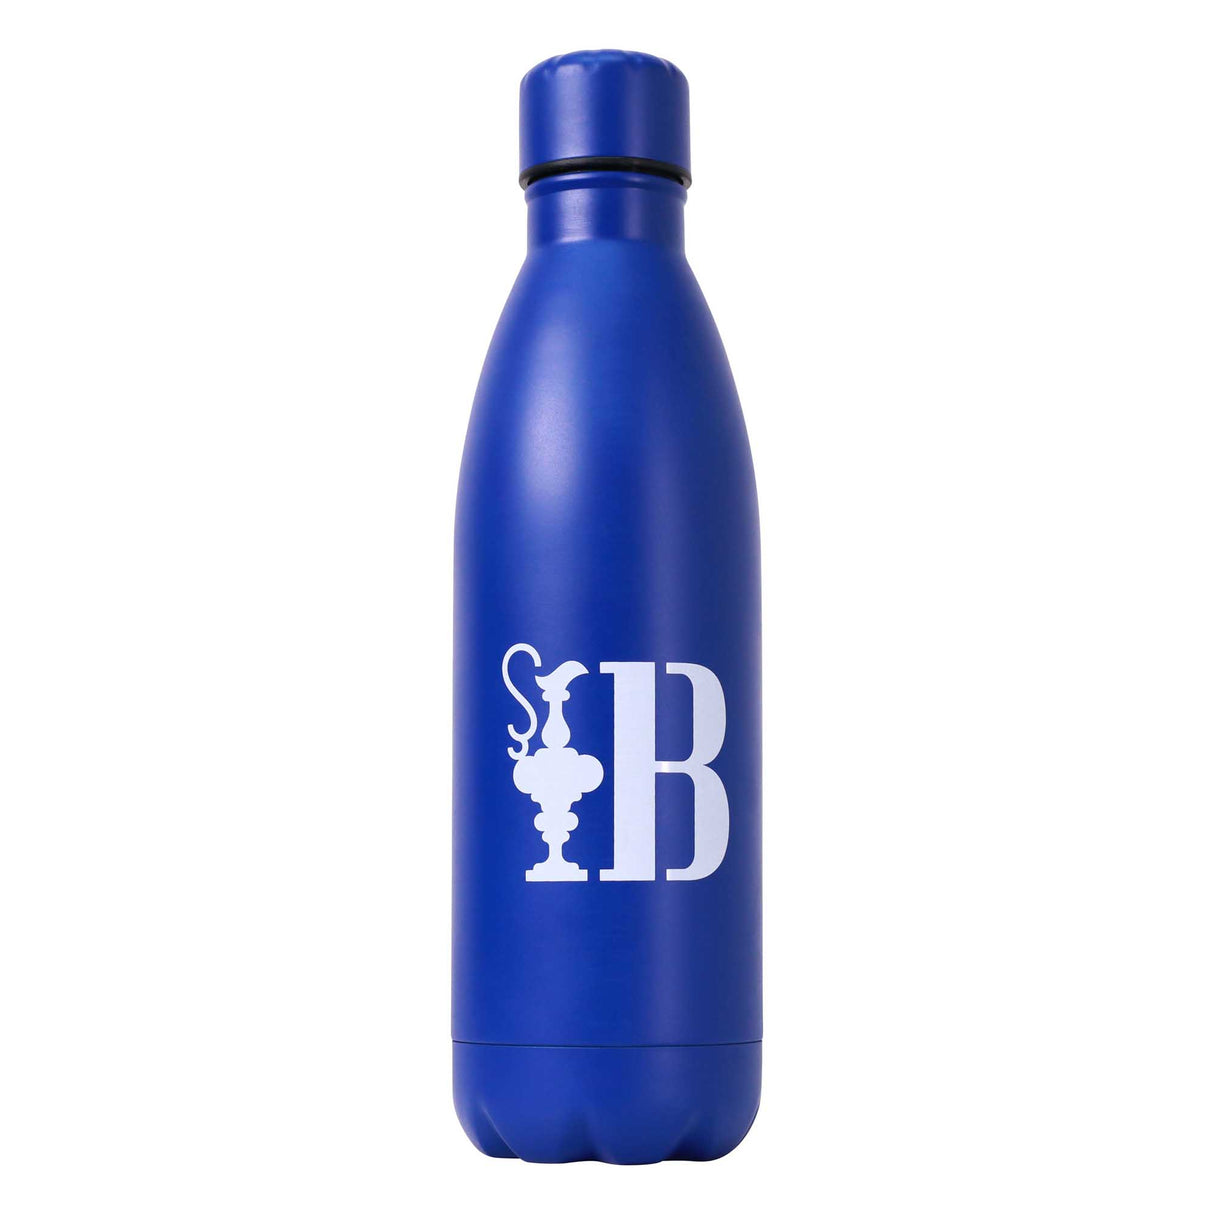 37th America’s Cup Stainless Steel Bottle Navy